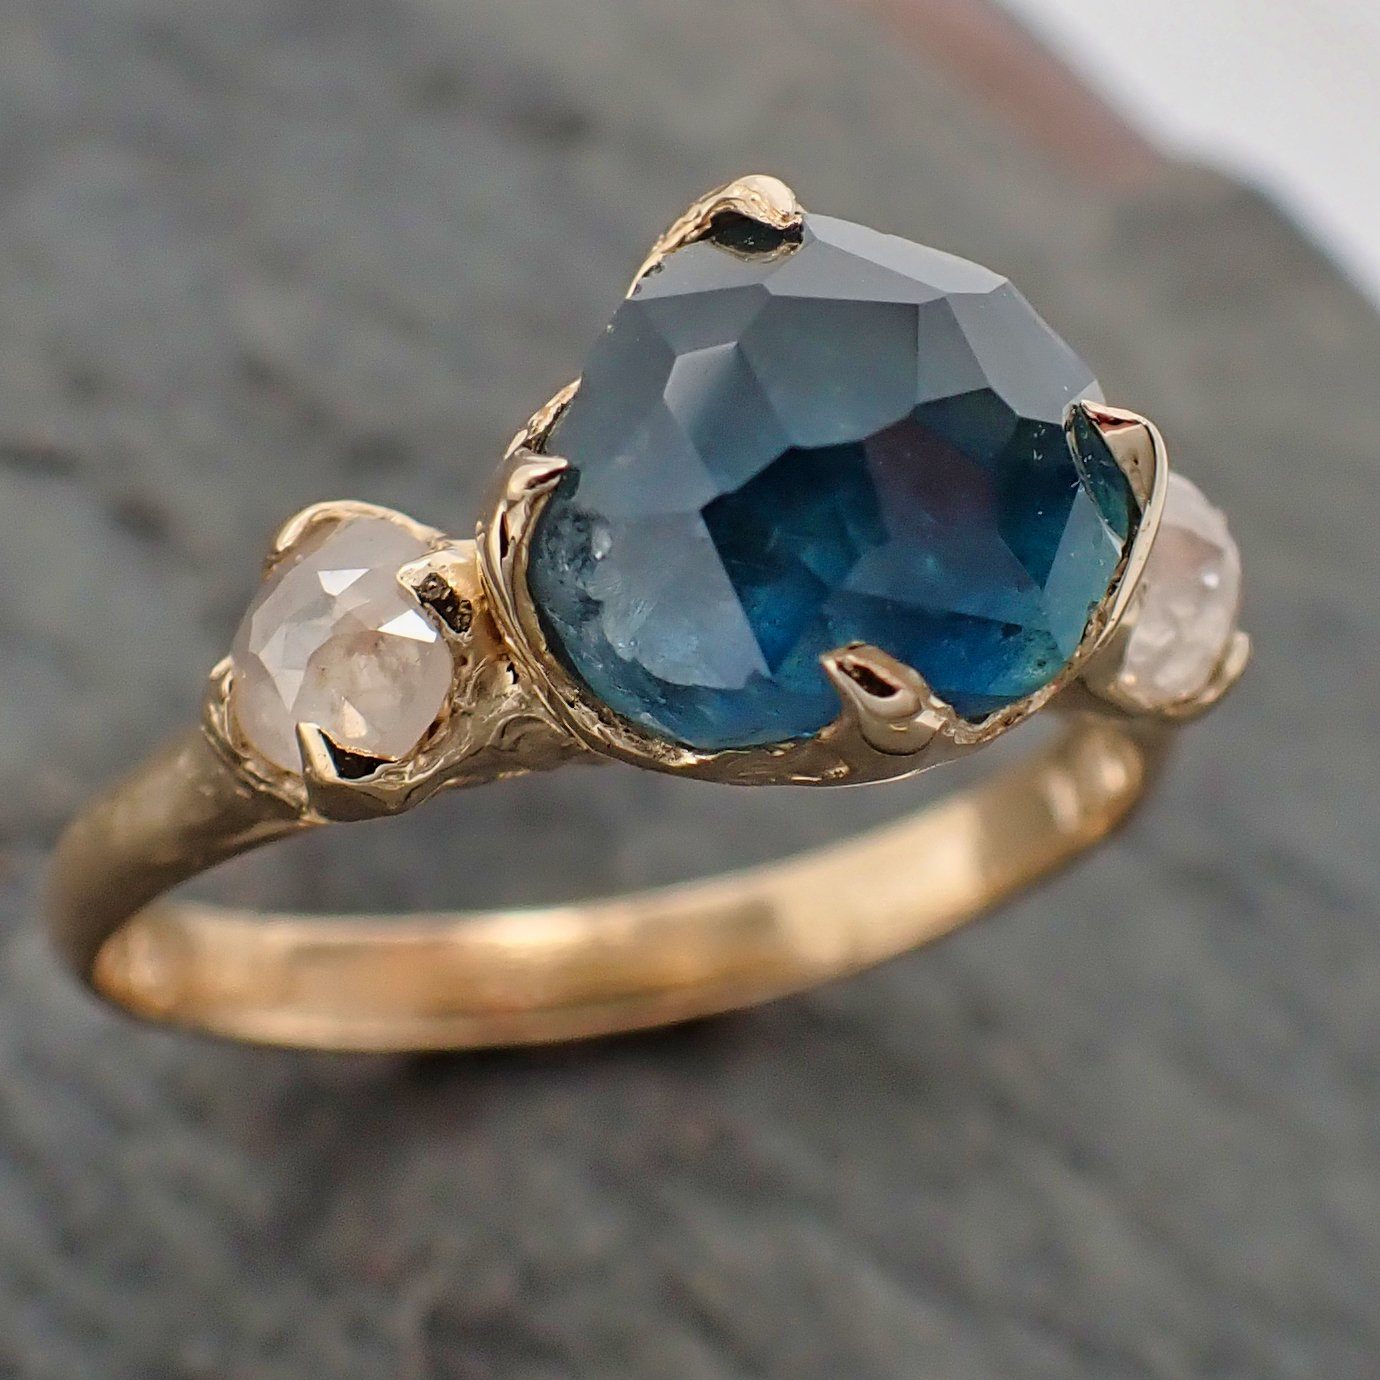 Partially faceted blue Montana Sapphire and fancy Diamonds 14k Yellow Gold Engagement Wedding Ring Gemstone Ring Multi stone Ring 2193